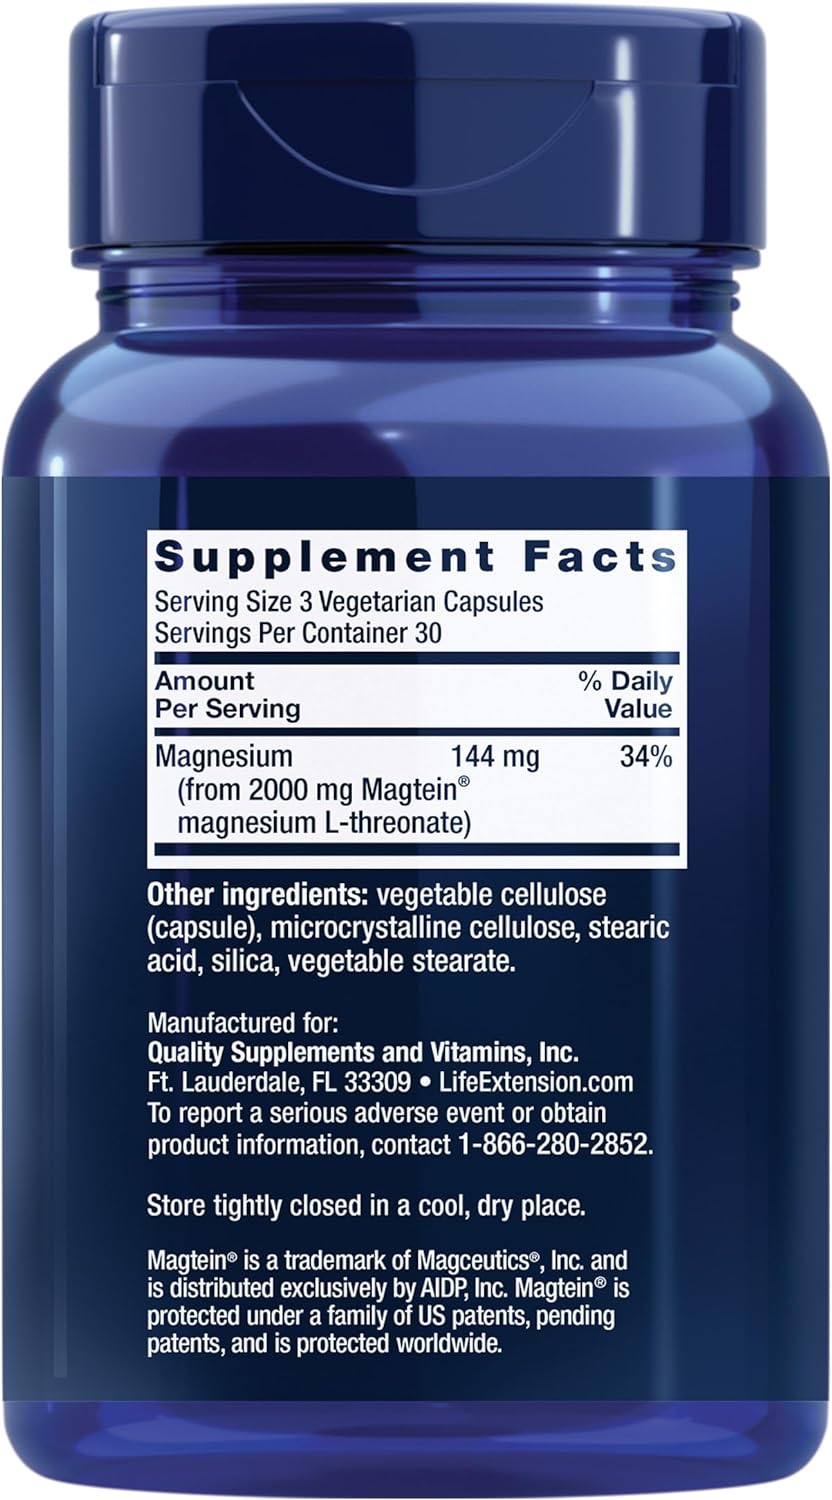 Life Extension Neuro-mag Magnesium L-threonate and Vitamin D3 Supplement Bundle for Brain, Bone and Immune Health Review